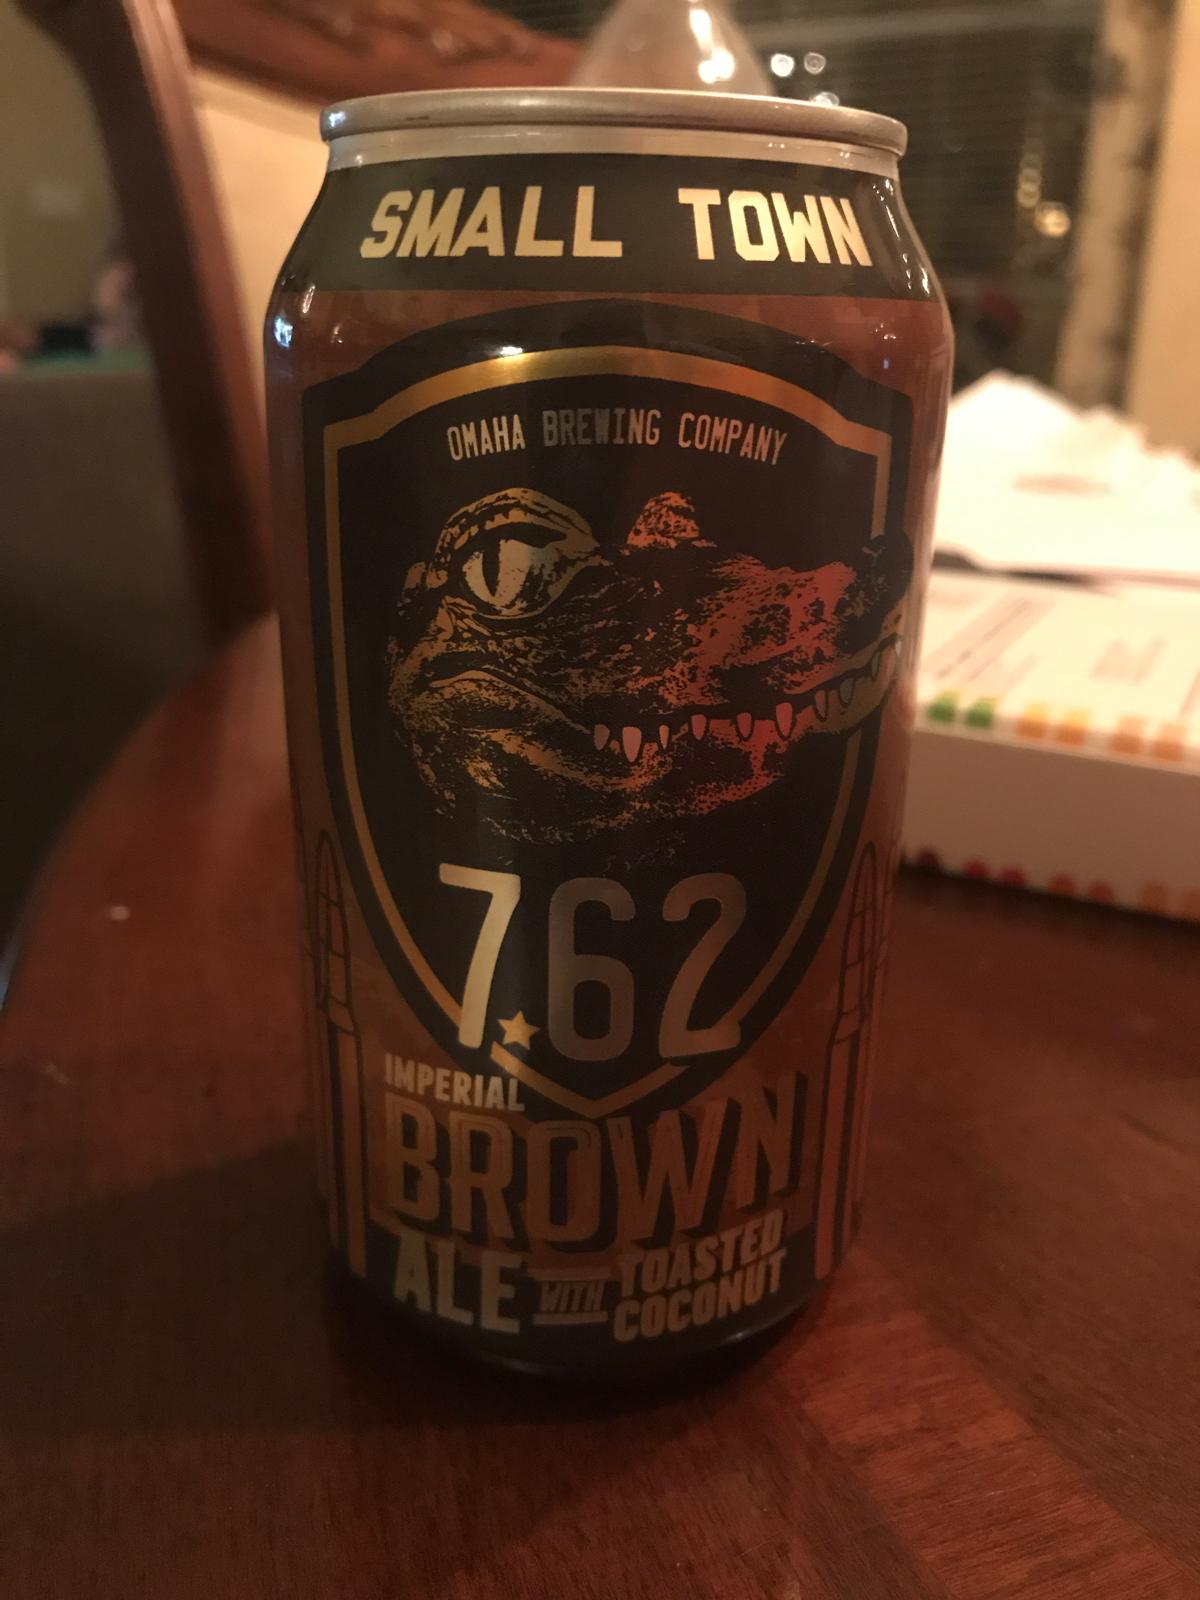 7.62 Imperial Brown Ale with Toasted Coconut